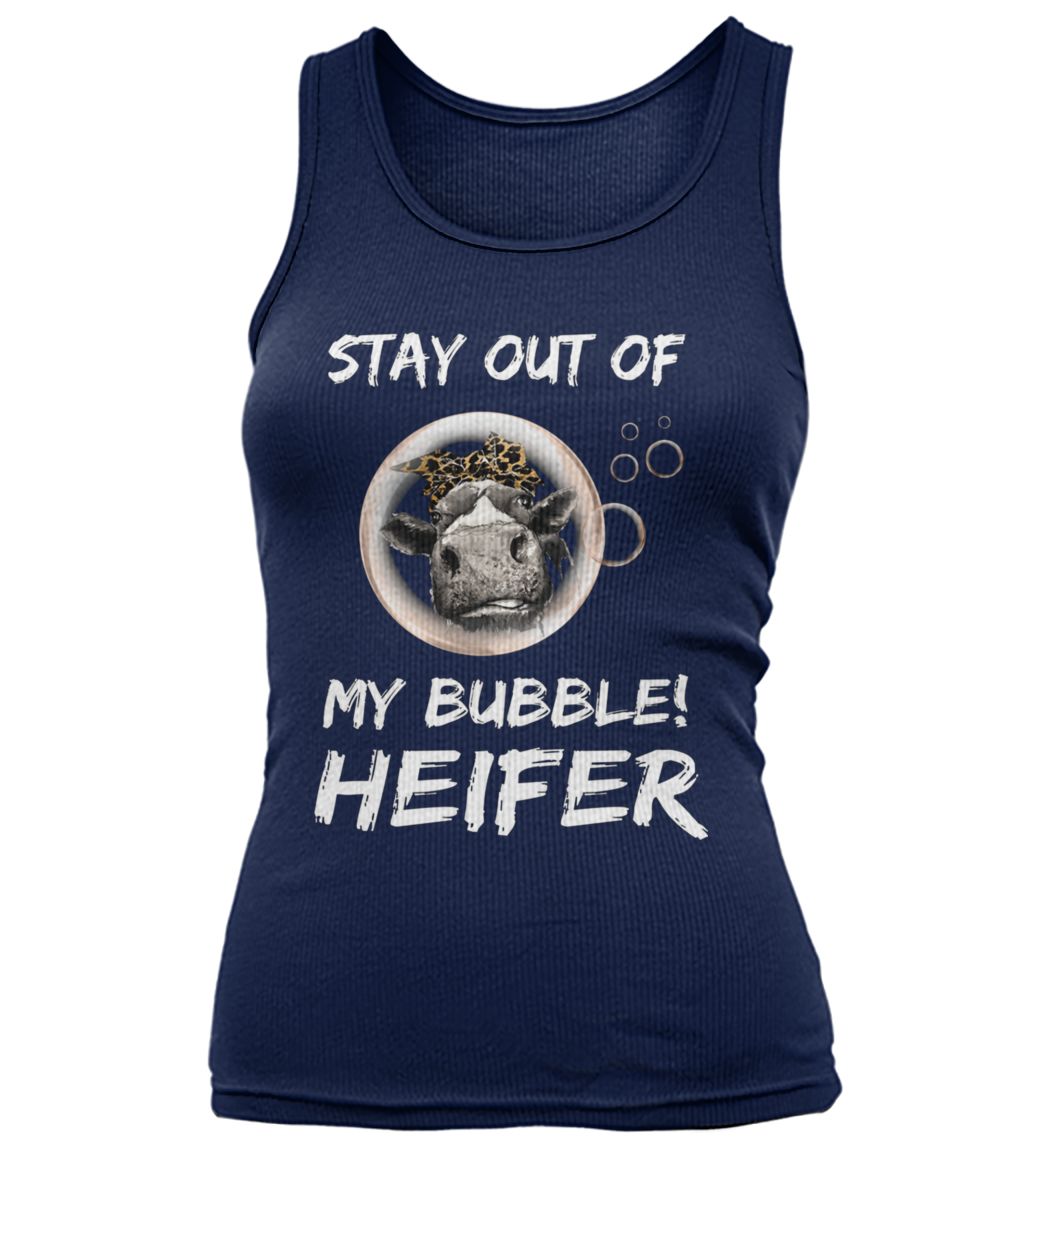 Stay out of my bubble heifer women's tank top